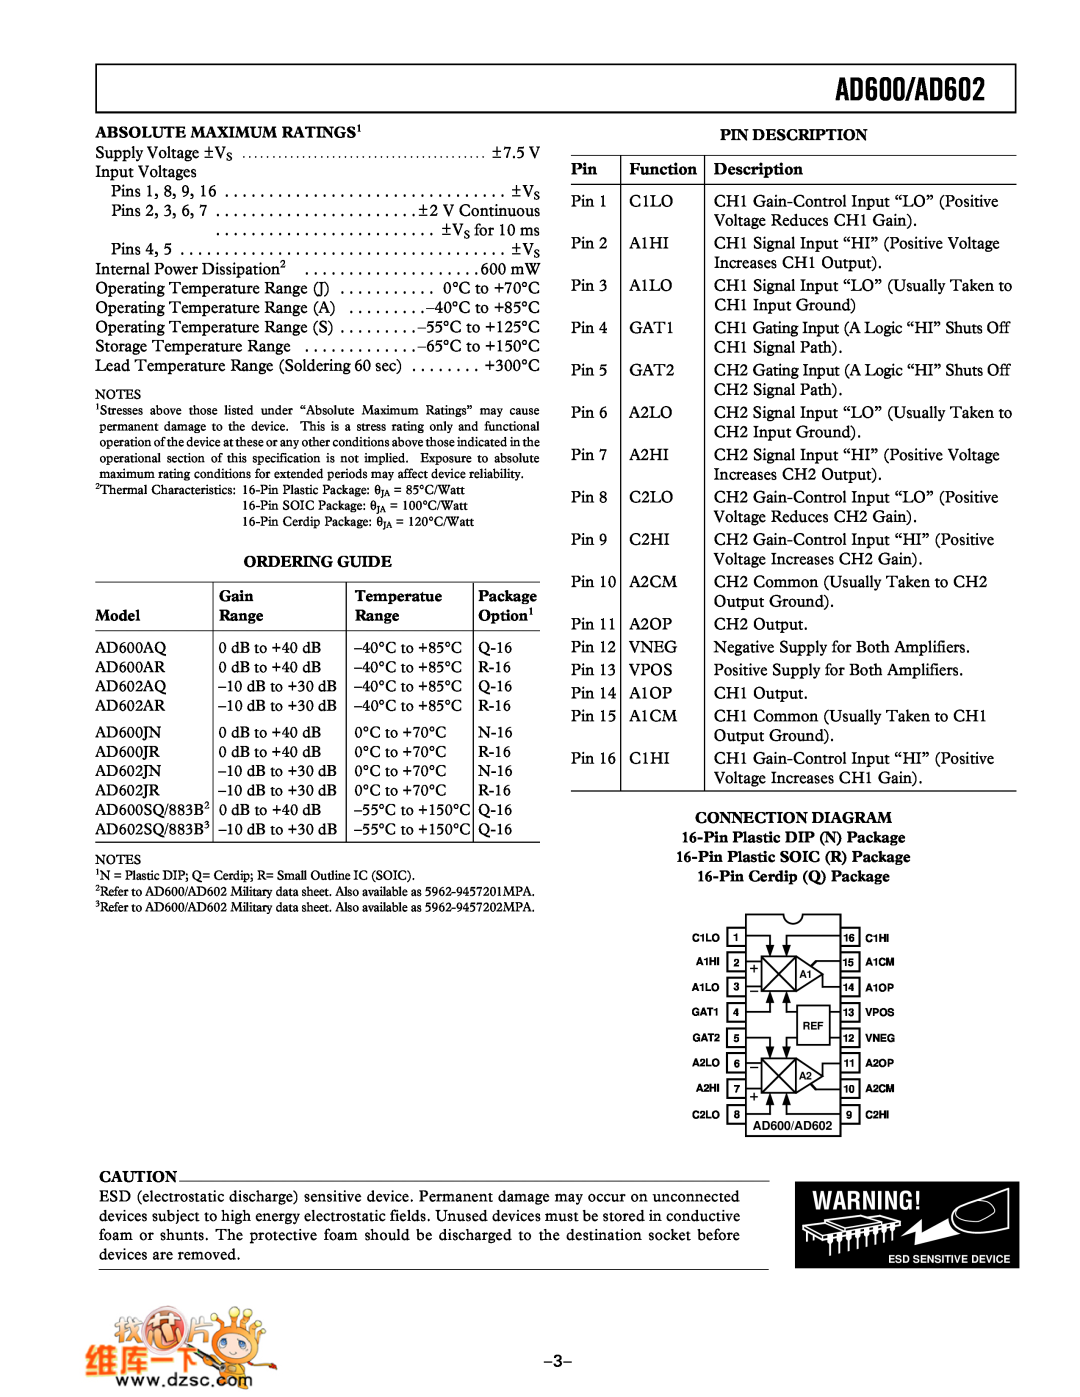 Analog Devices manual AD600/AD602, Function, Description 